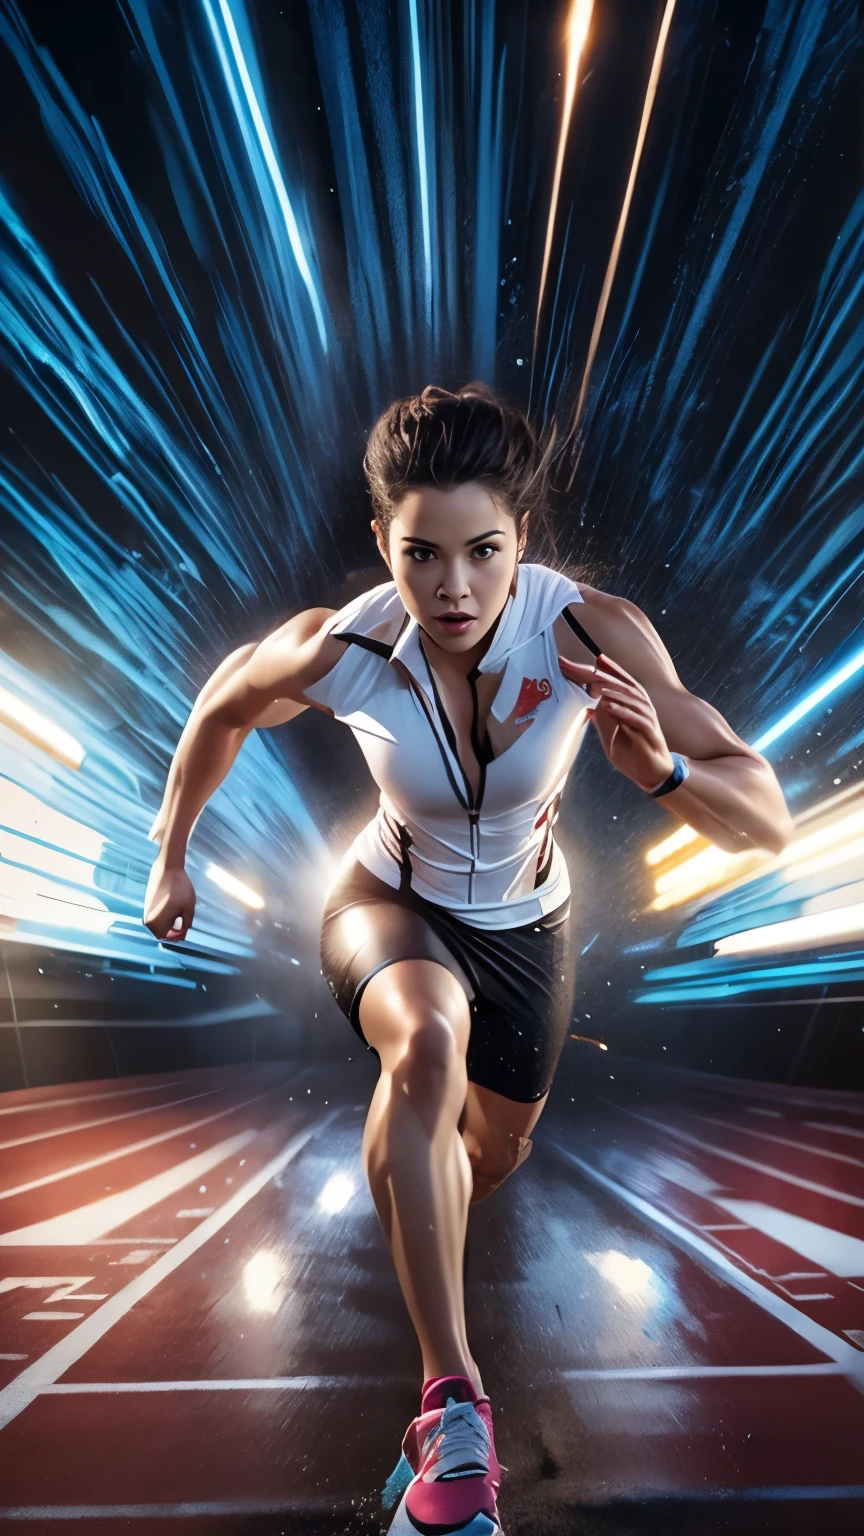 a close up of a women running on a track with a light trail behind her, sprinting, athlete photography, hyperspeed, tracers, athletic body, cover shot, dynamic active running pose, high-speed sports photography, sports photography, by Edwin Georgi, light speed, high speed motion, dynamic movie still, sport photography, movie promotional image, energy pulsing realistic, detailed, 4k